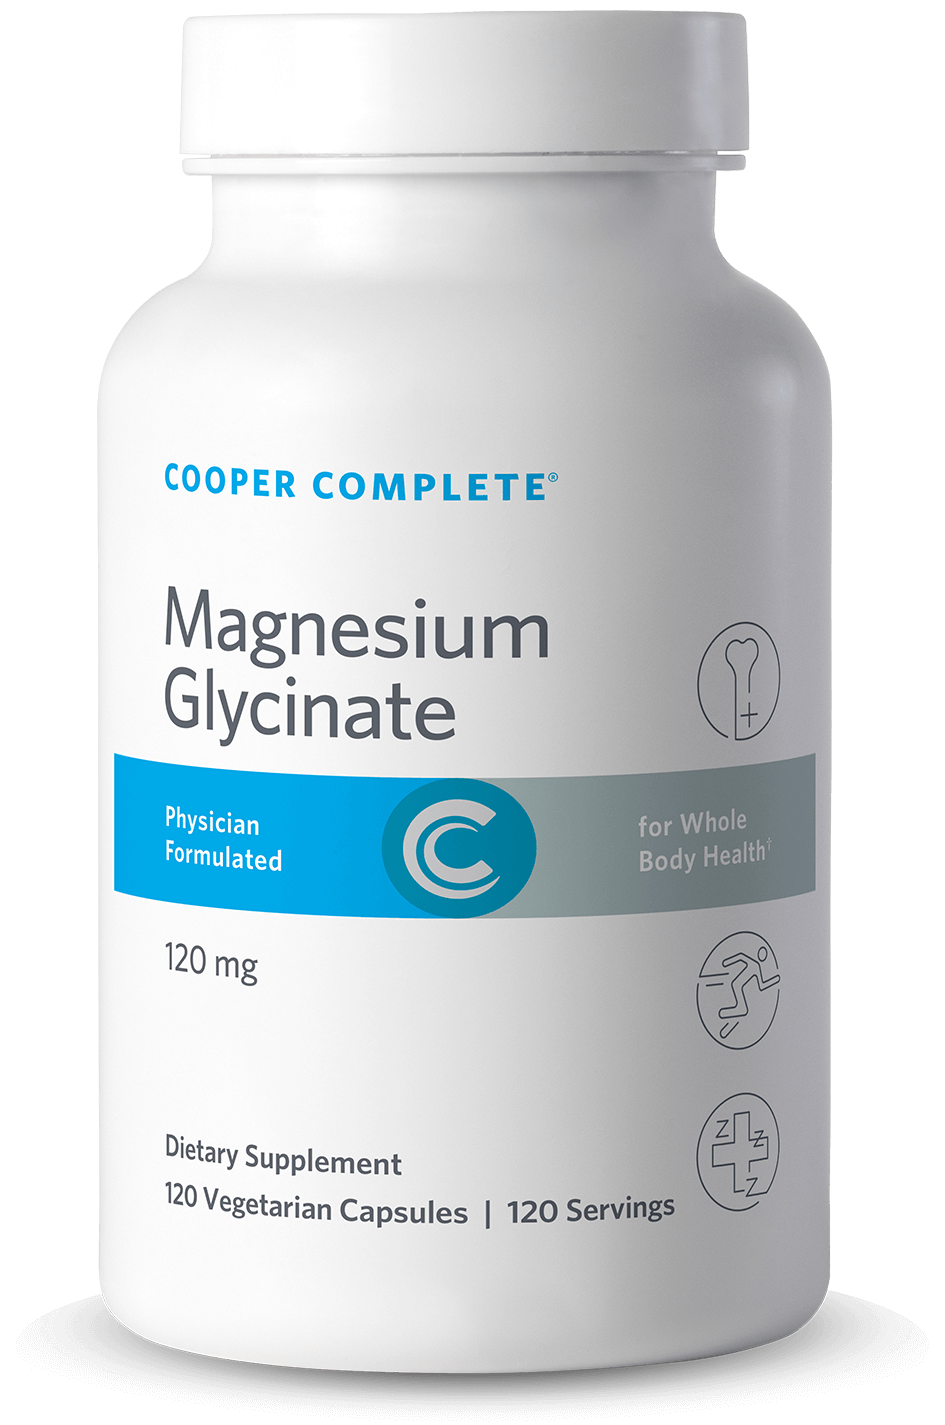 Photo of Cooper Complete 120 mg Magnesium Glycinate Supplement bottle.